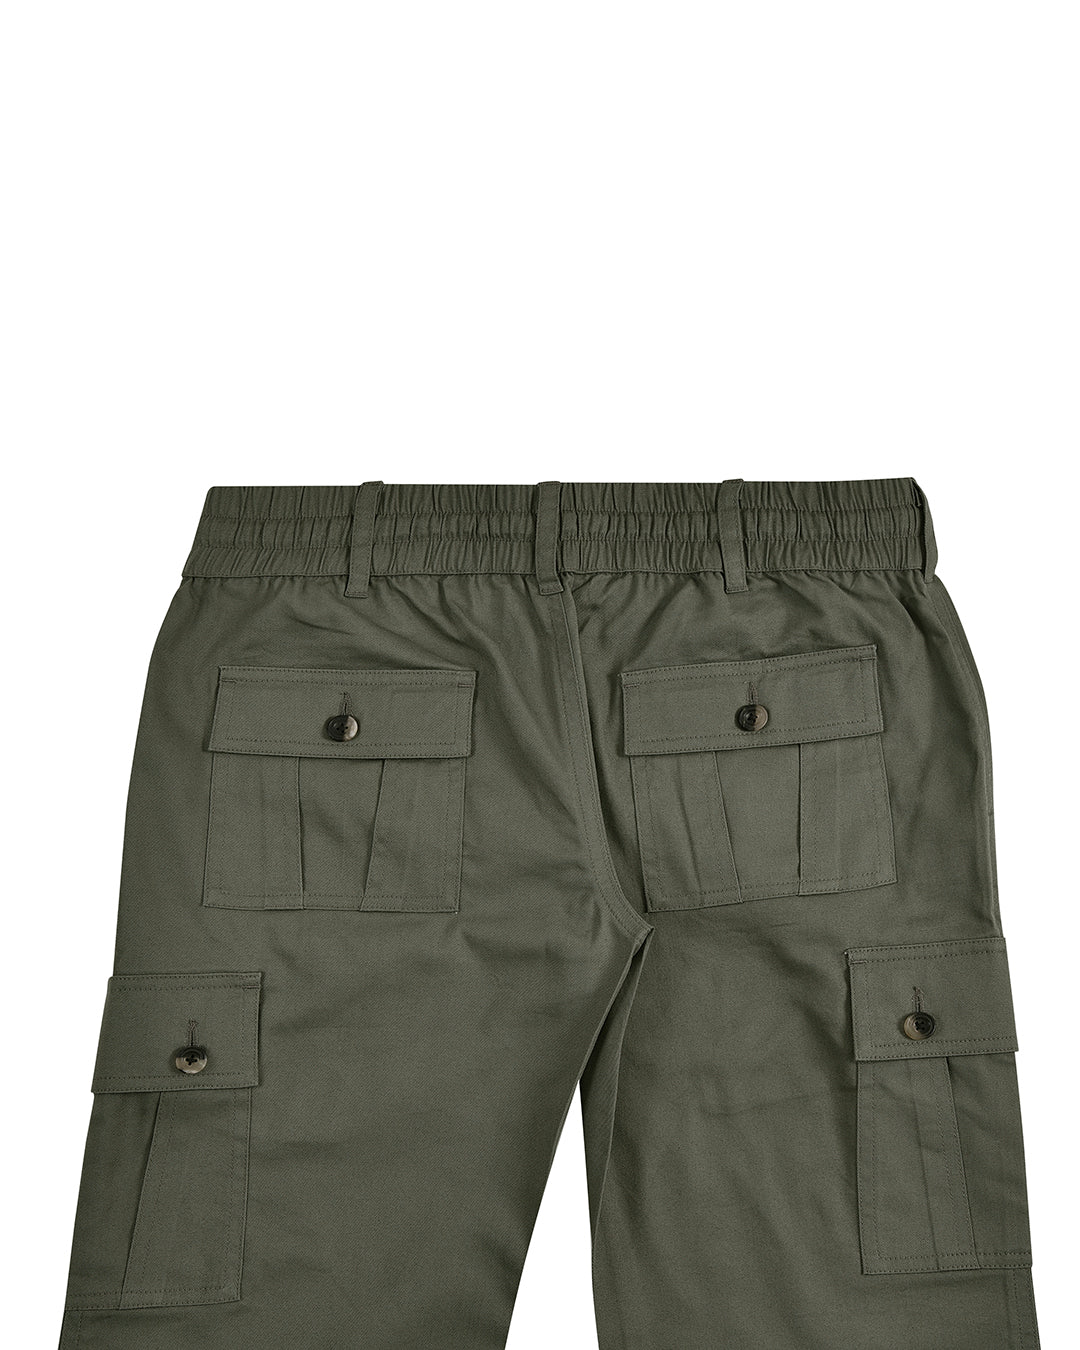 Back view of custom cargo pants for men by Luxire in olive